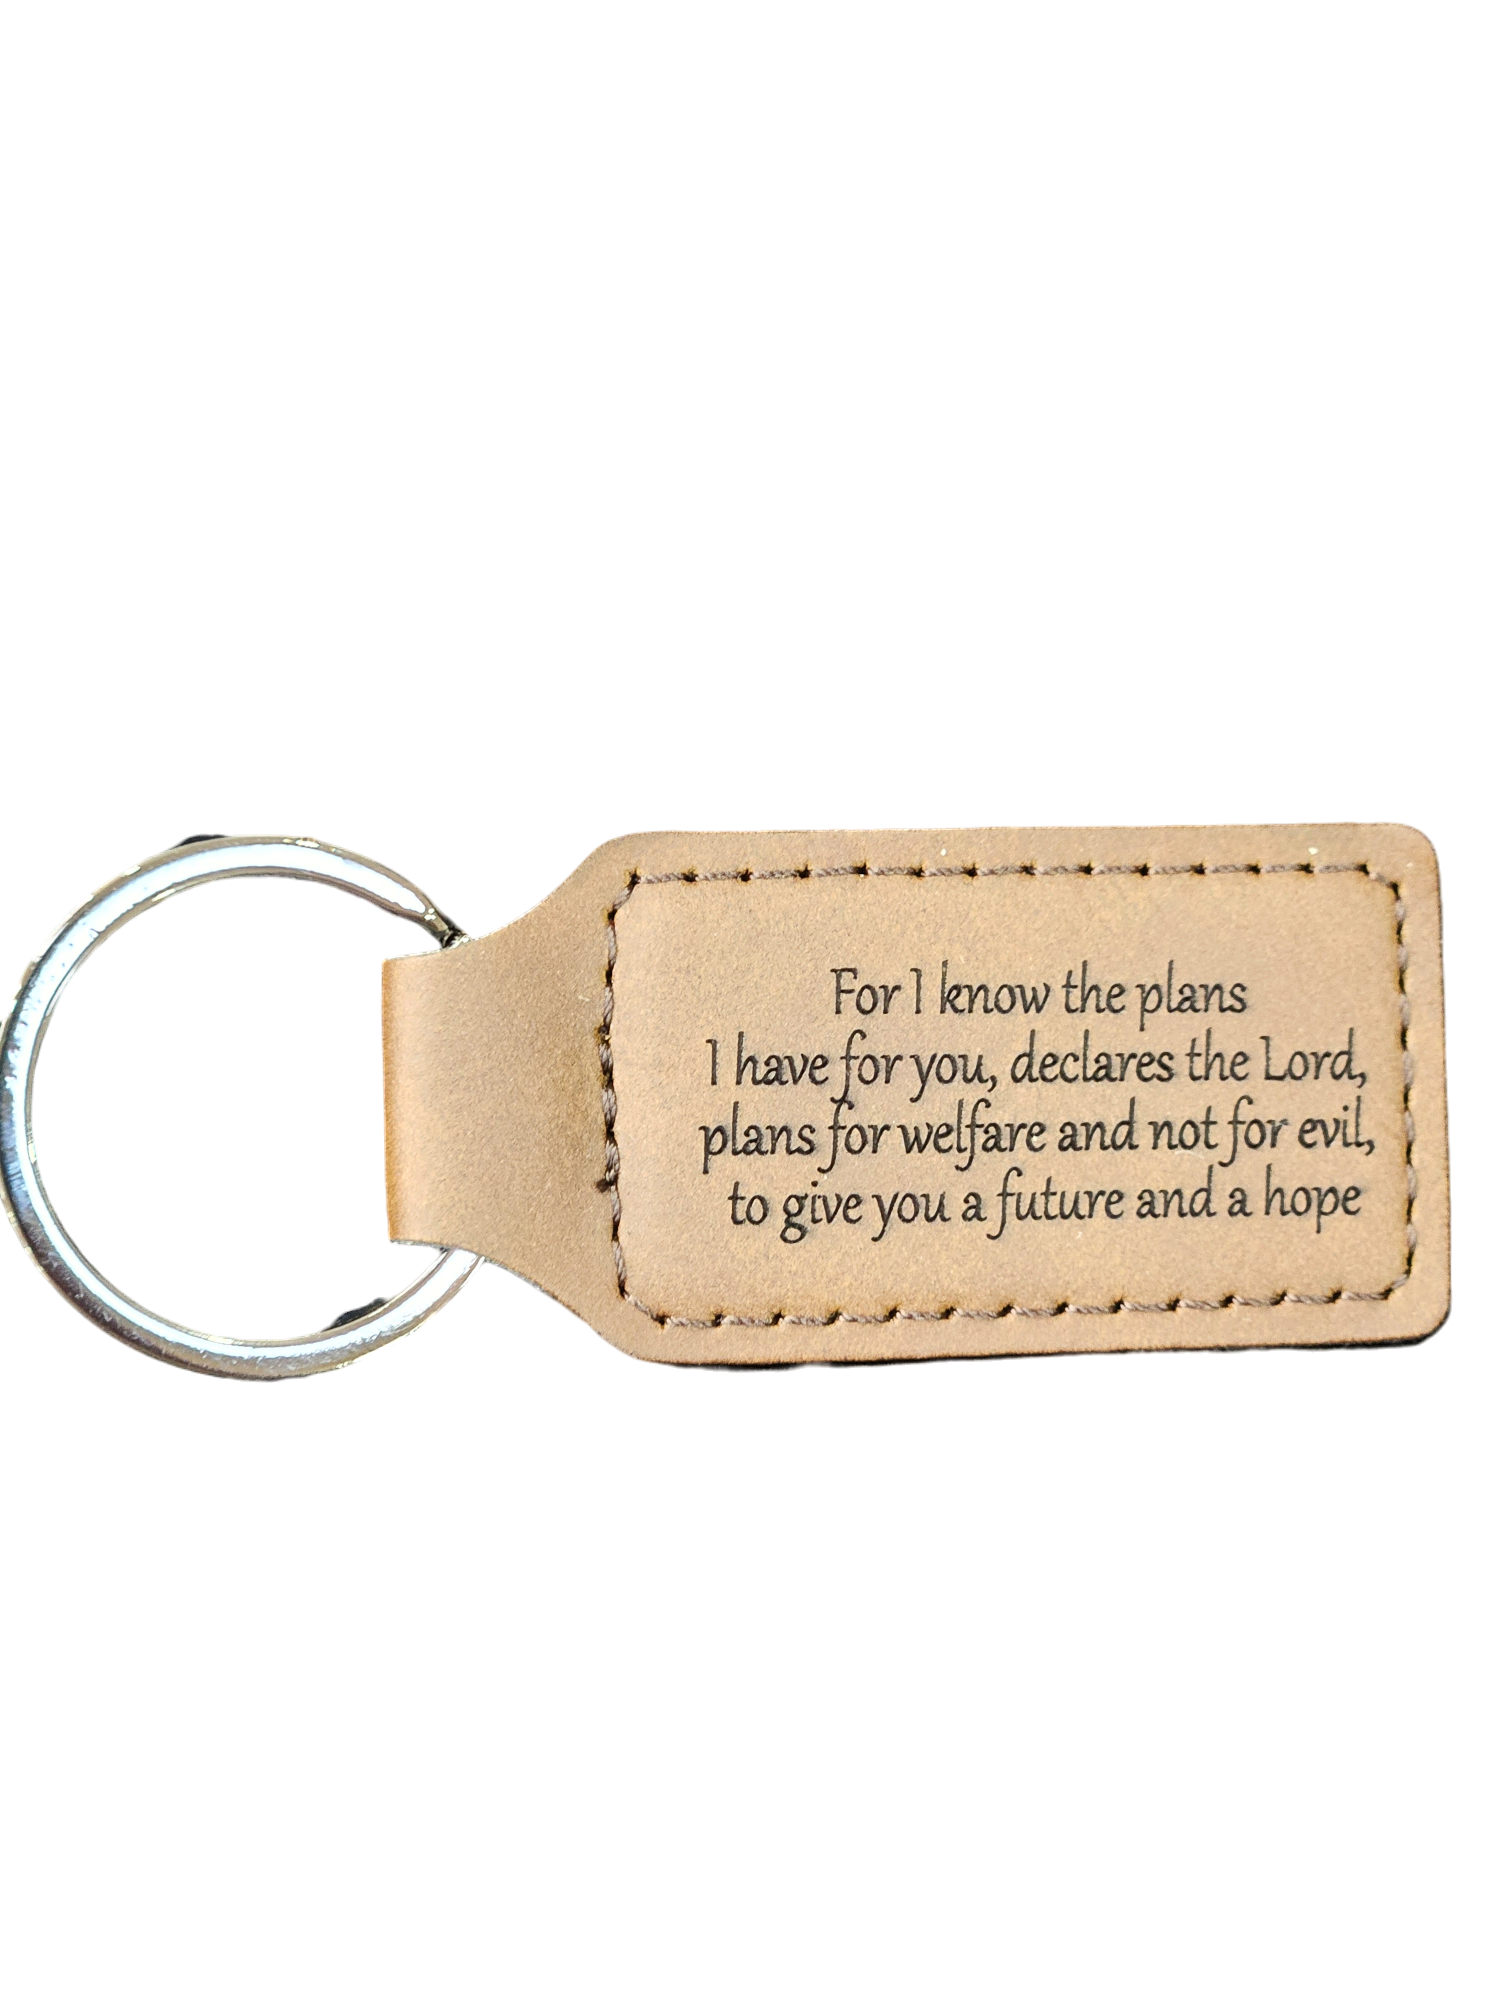 For I know the plans- keychain